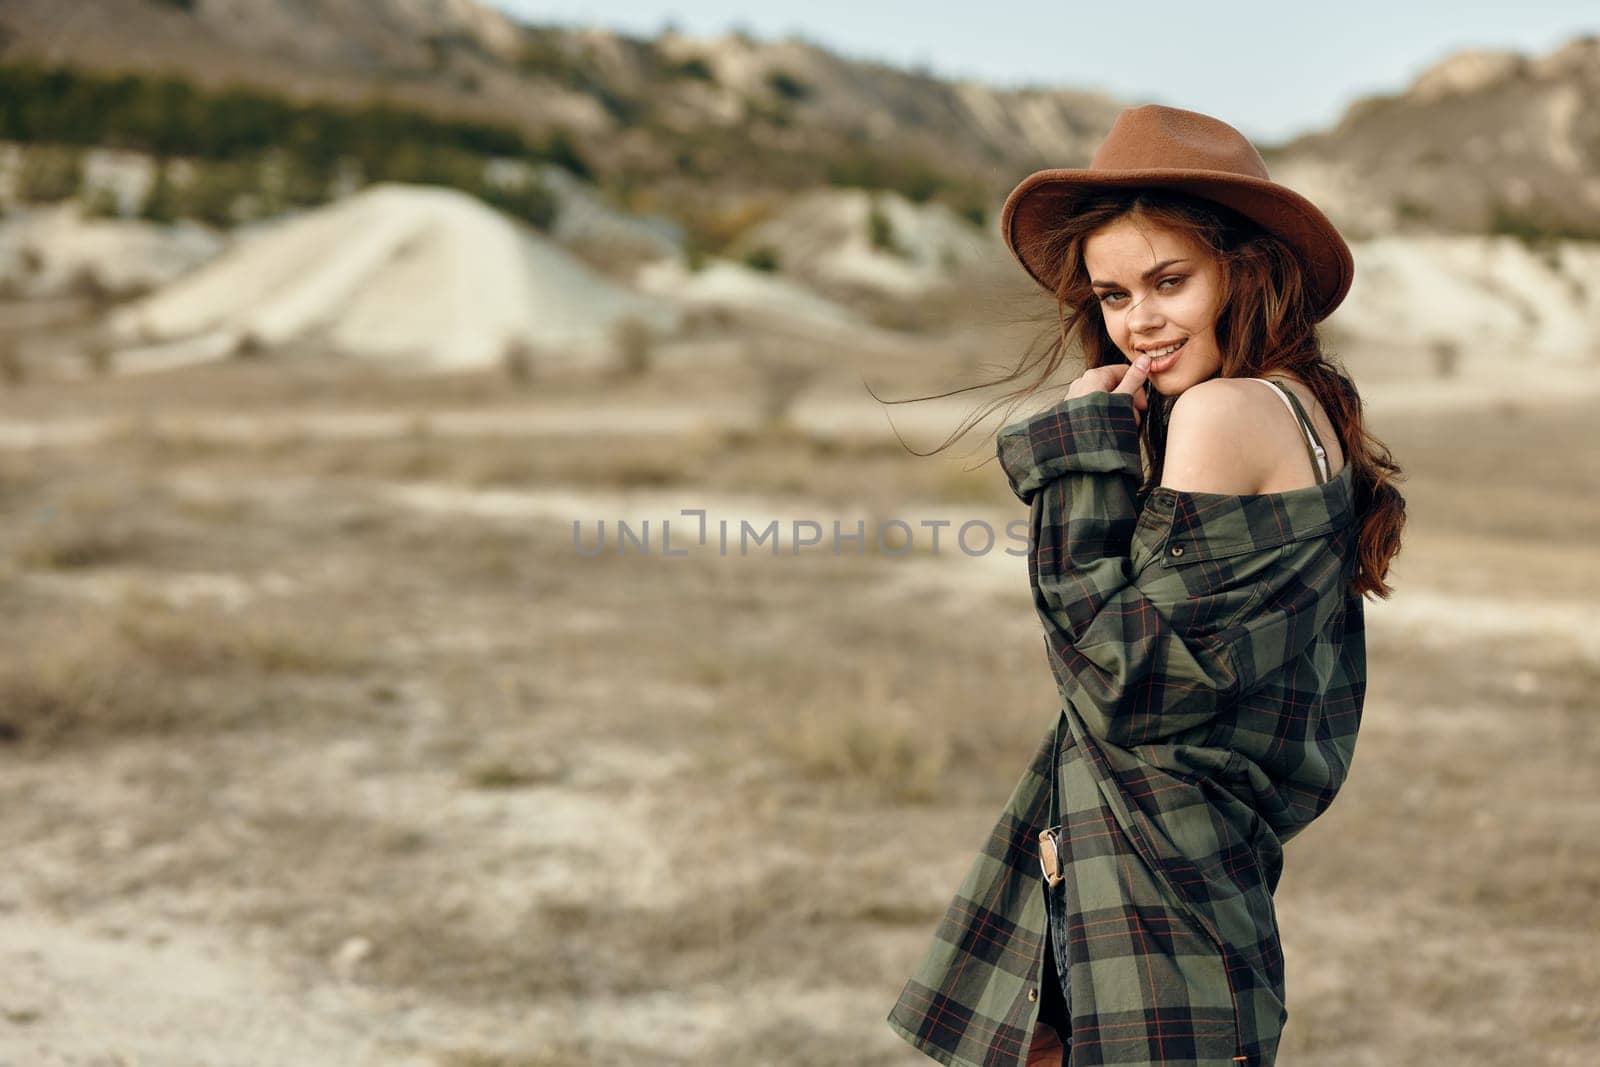 Woman in plaid shirt and hat standing in desert with majestic mountains in background on sunny day by Vichizh